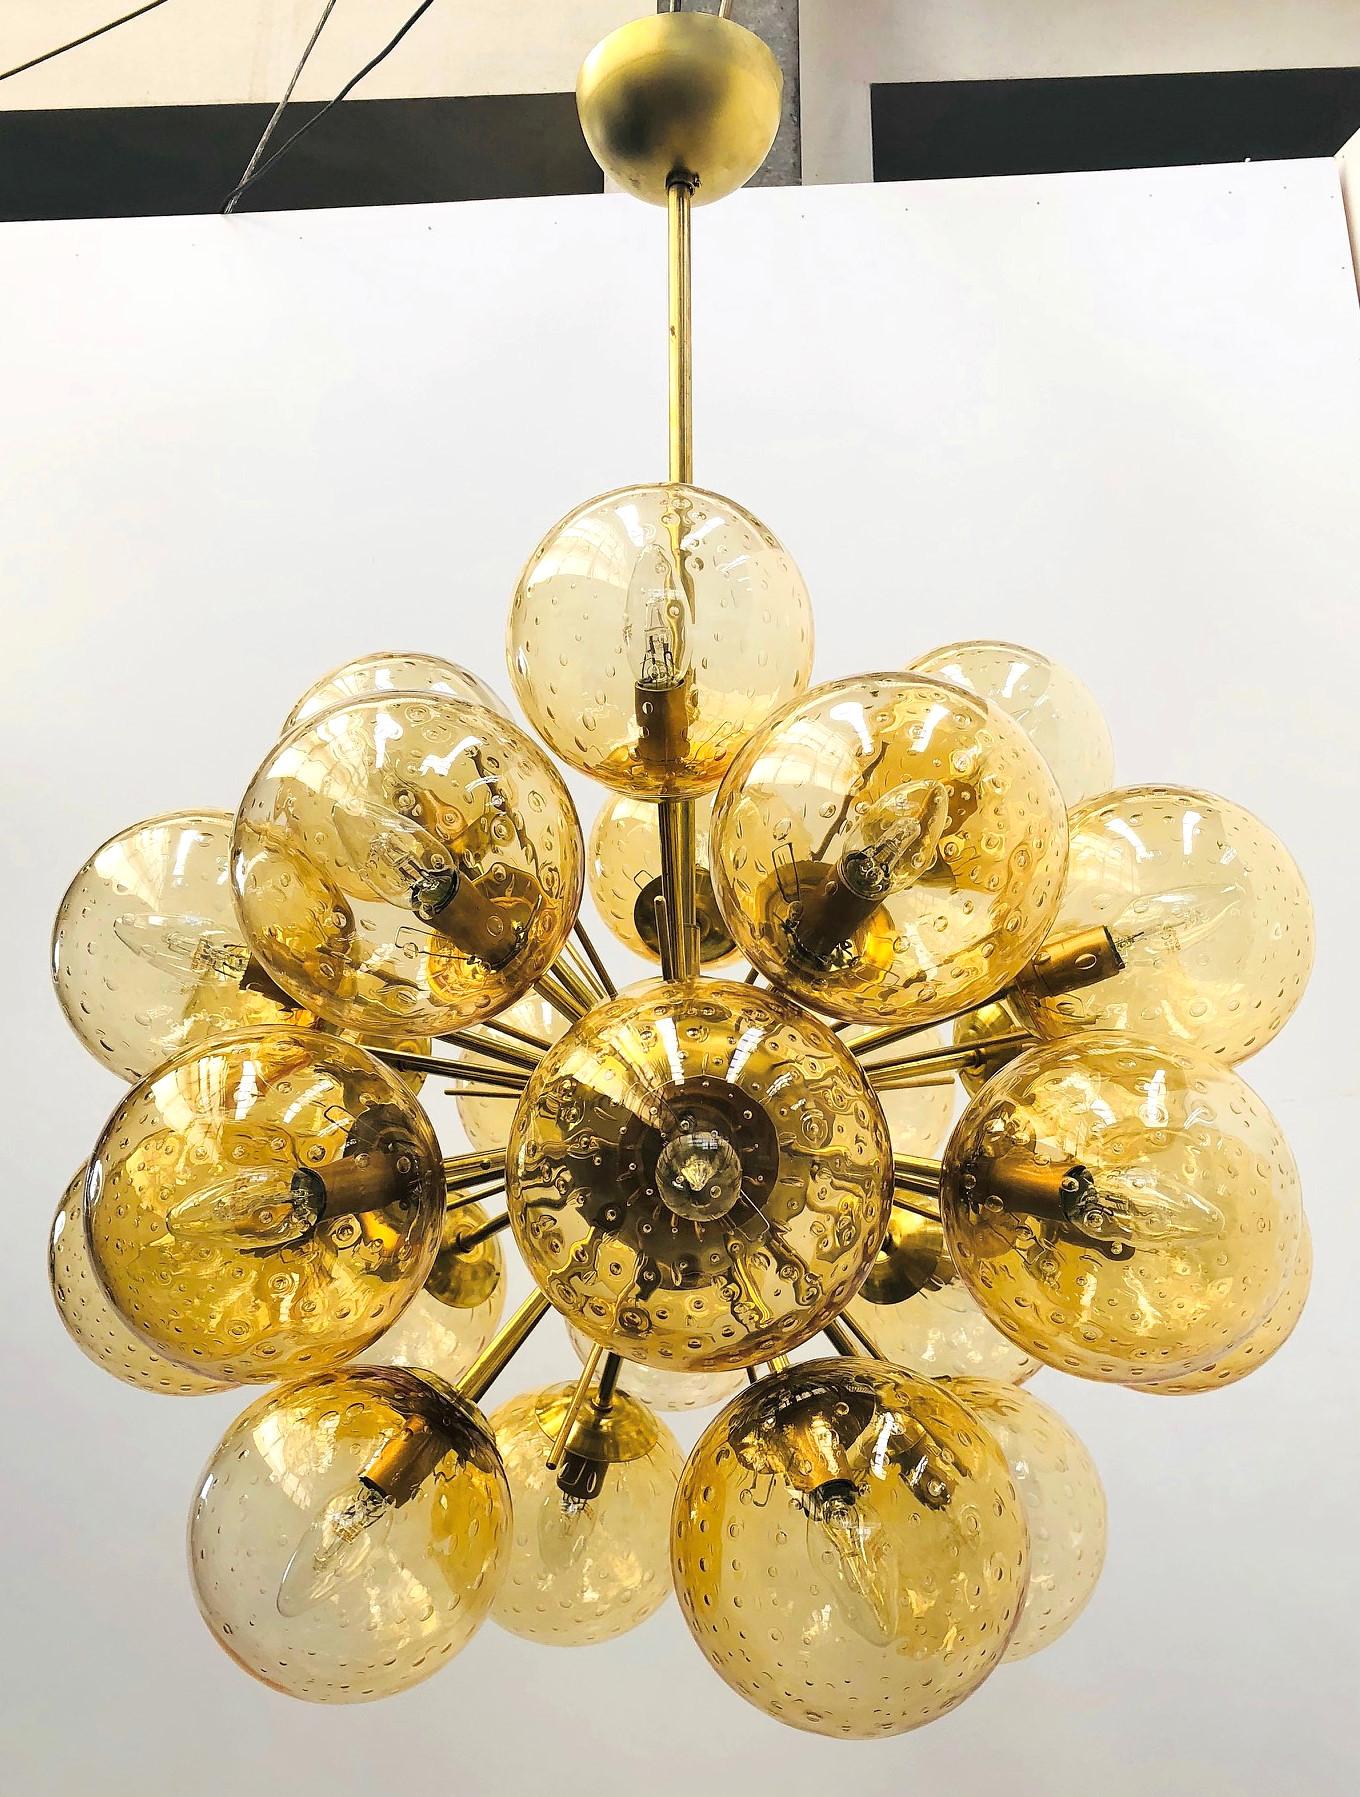 Italian sputnik chandelier with 24 Murano glass globes mounted on brass frame / Designed by Fabio Bergomi for Fabio Ltd / Made in Italy
24 lights / E12 or E14 type / max 40W each
Diameter: 28 inches / Height: 47 inches including rod and canopy
Order